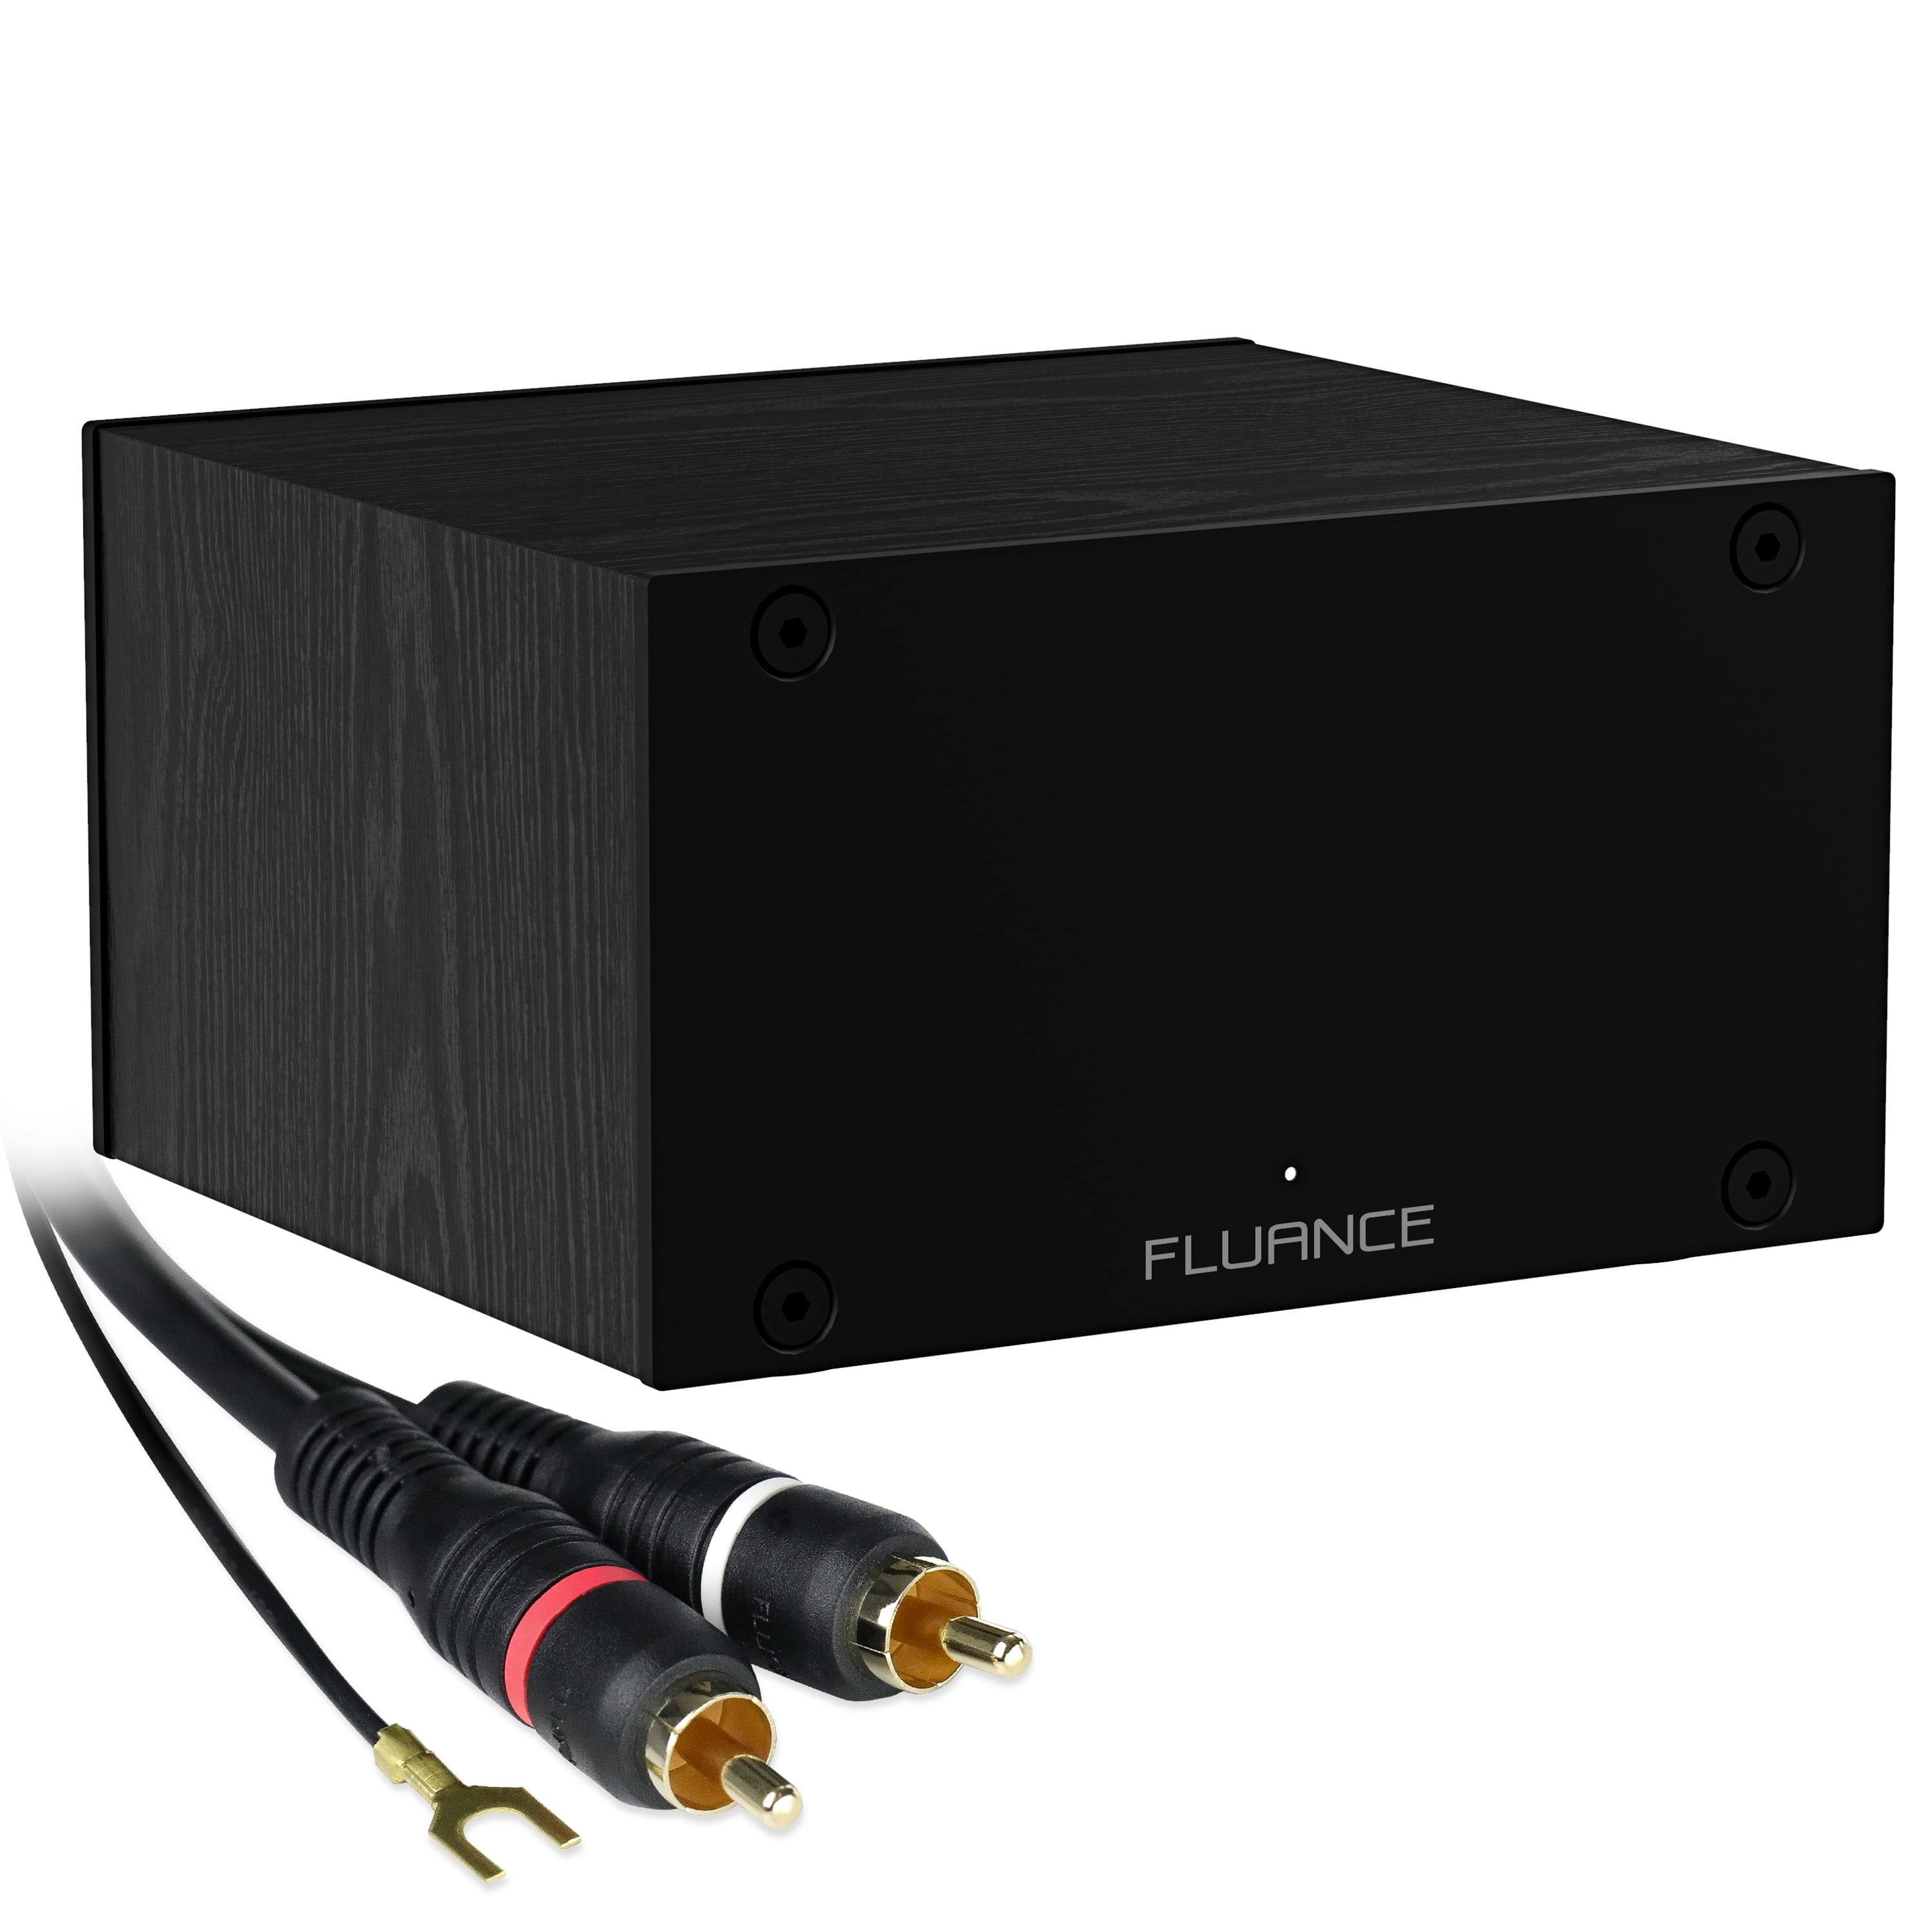 Preamplifier Fluance PA10 High Fidelity Phono Preamp with RIAA Equalization for MM Turntables/Vinyl Record Players 